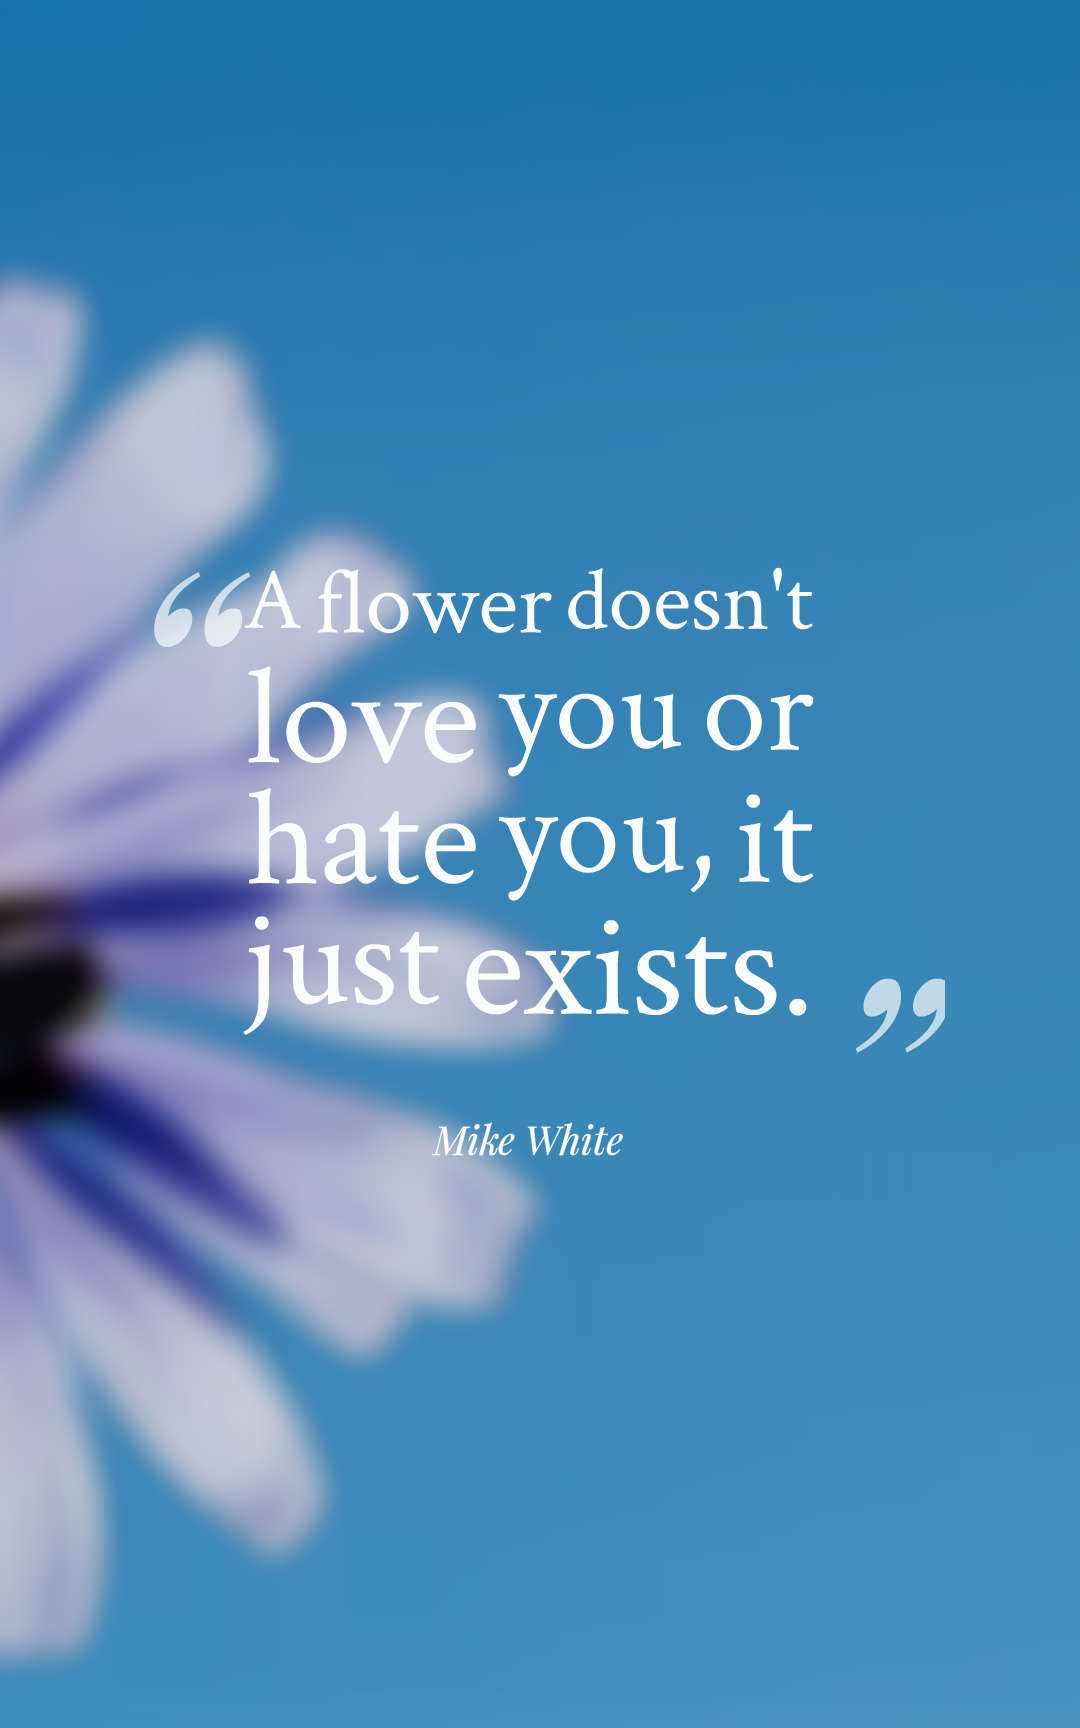 A flower doesn't love you or hate you, it just exists.